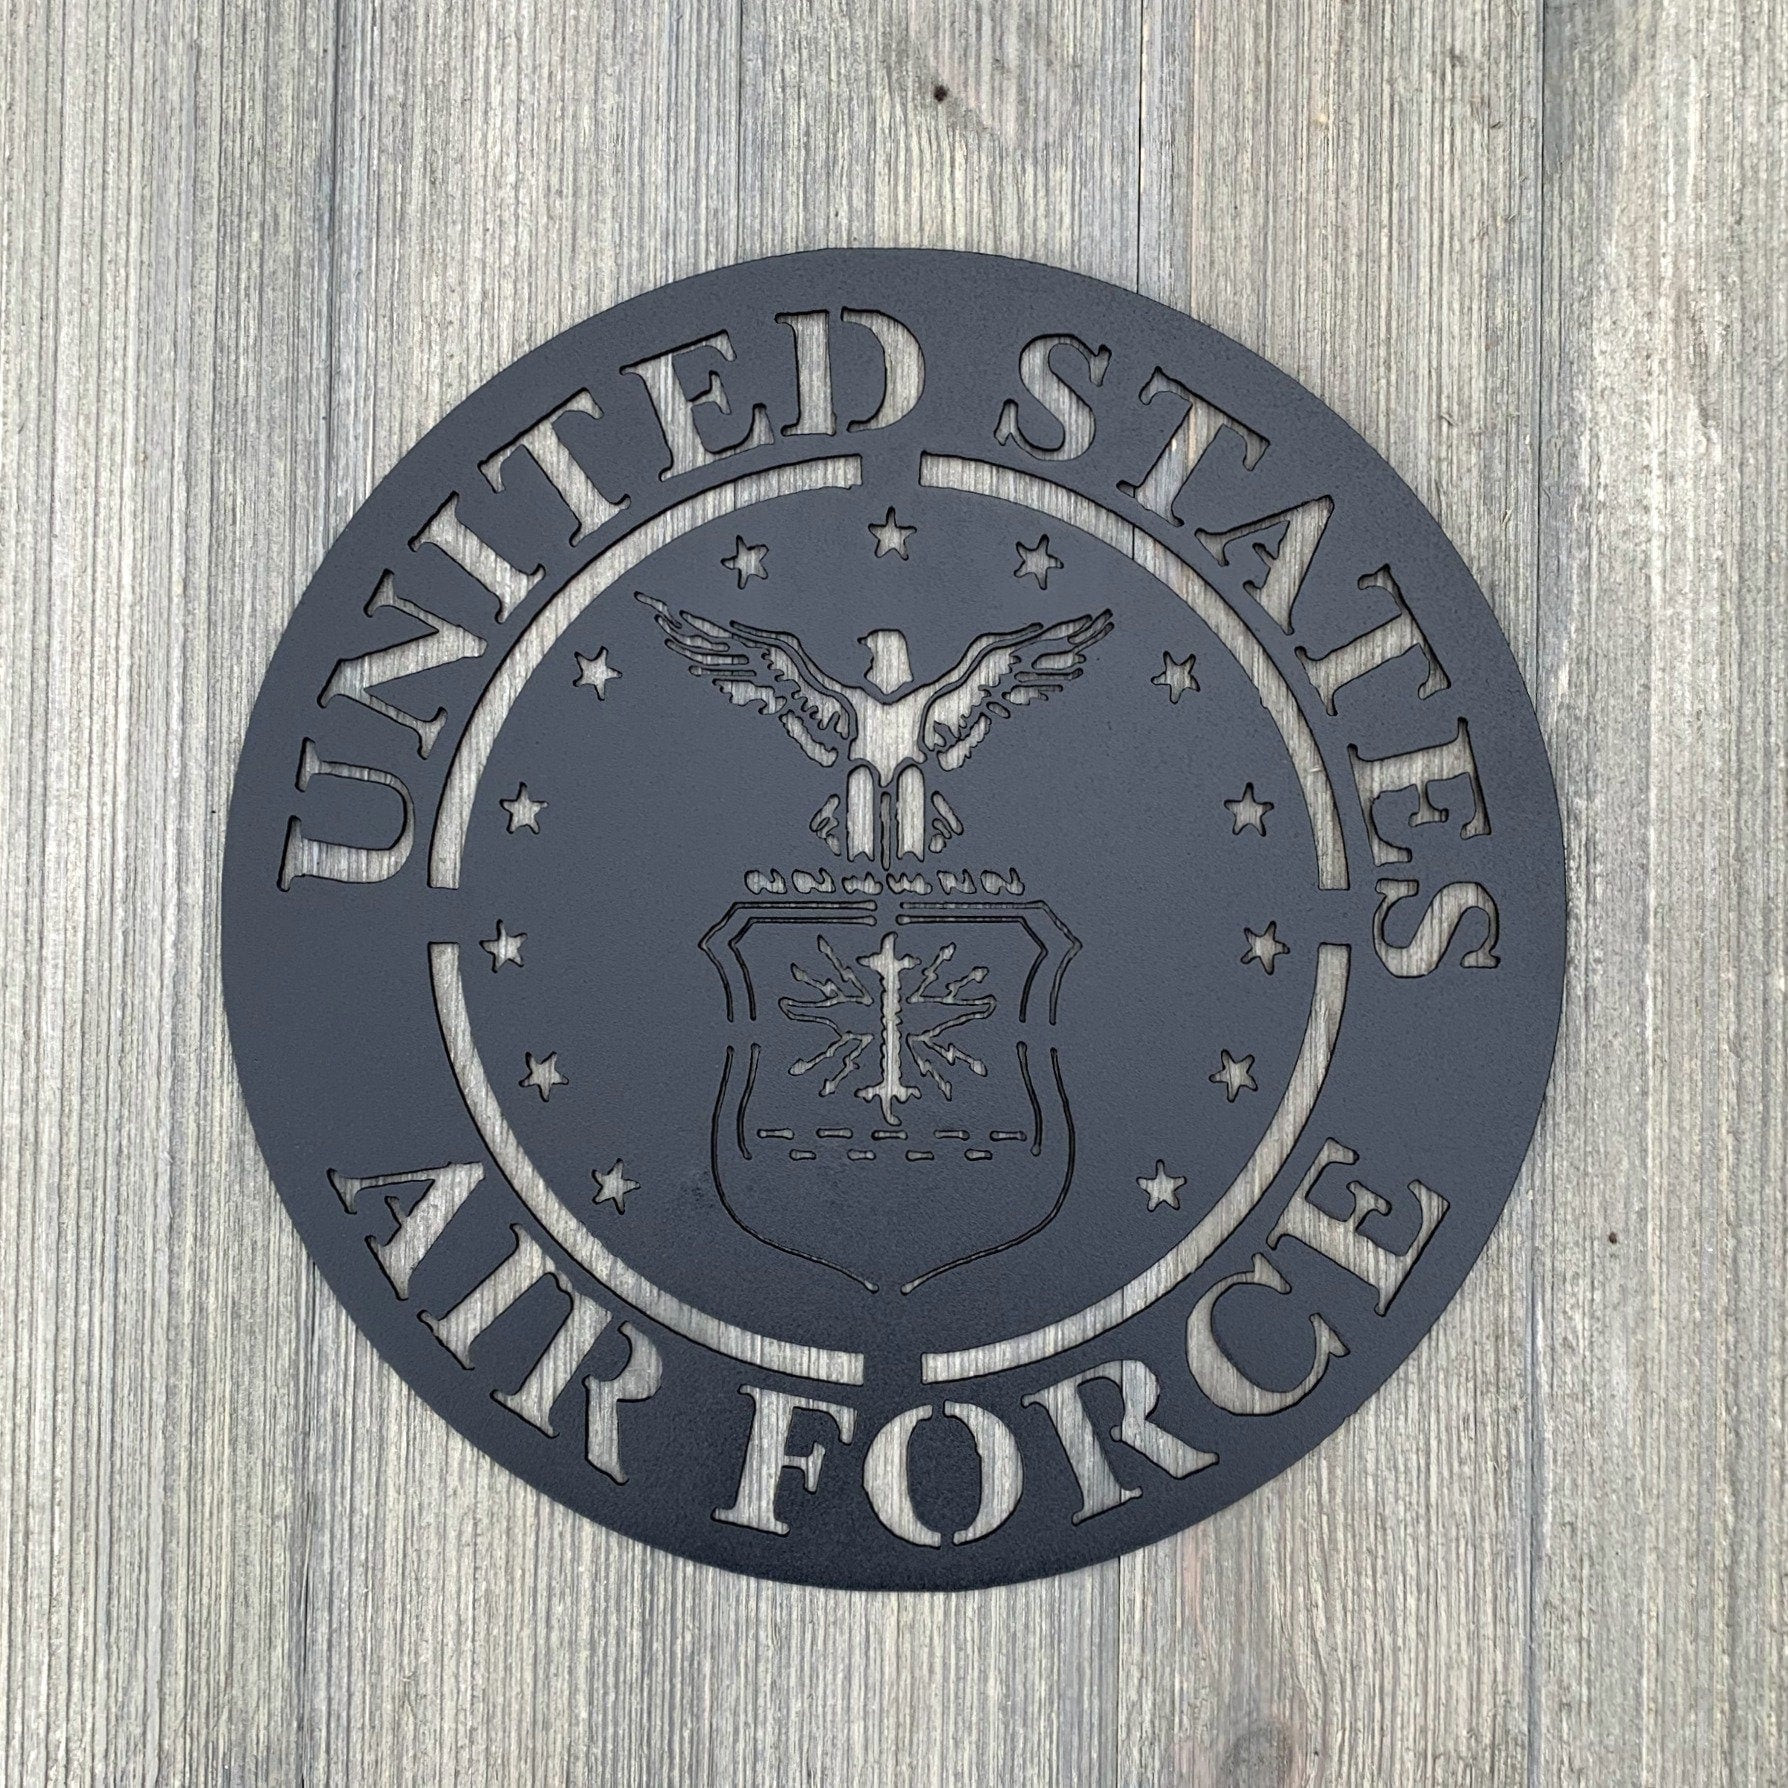 United States Airforce Metal Sign Cutout Cut Metal Sign Wall Metal Art ...